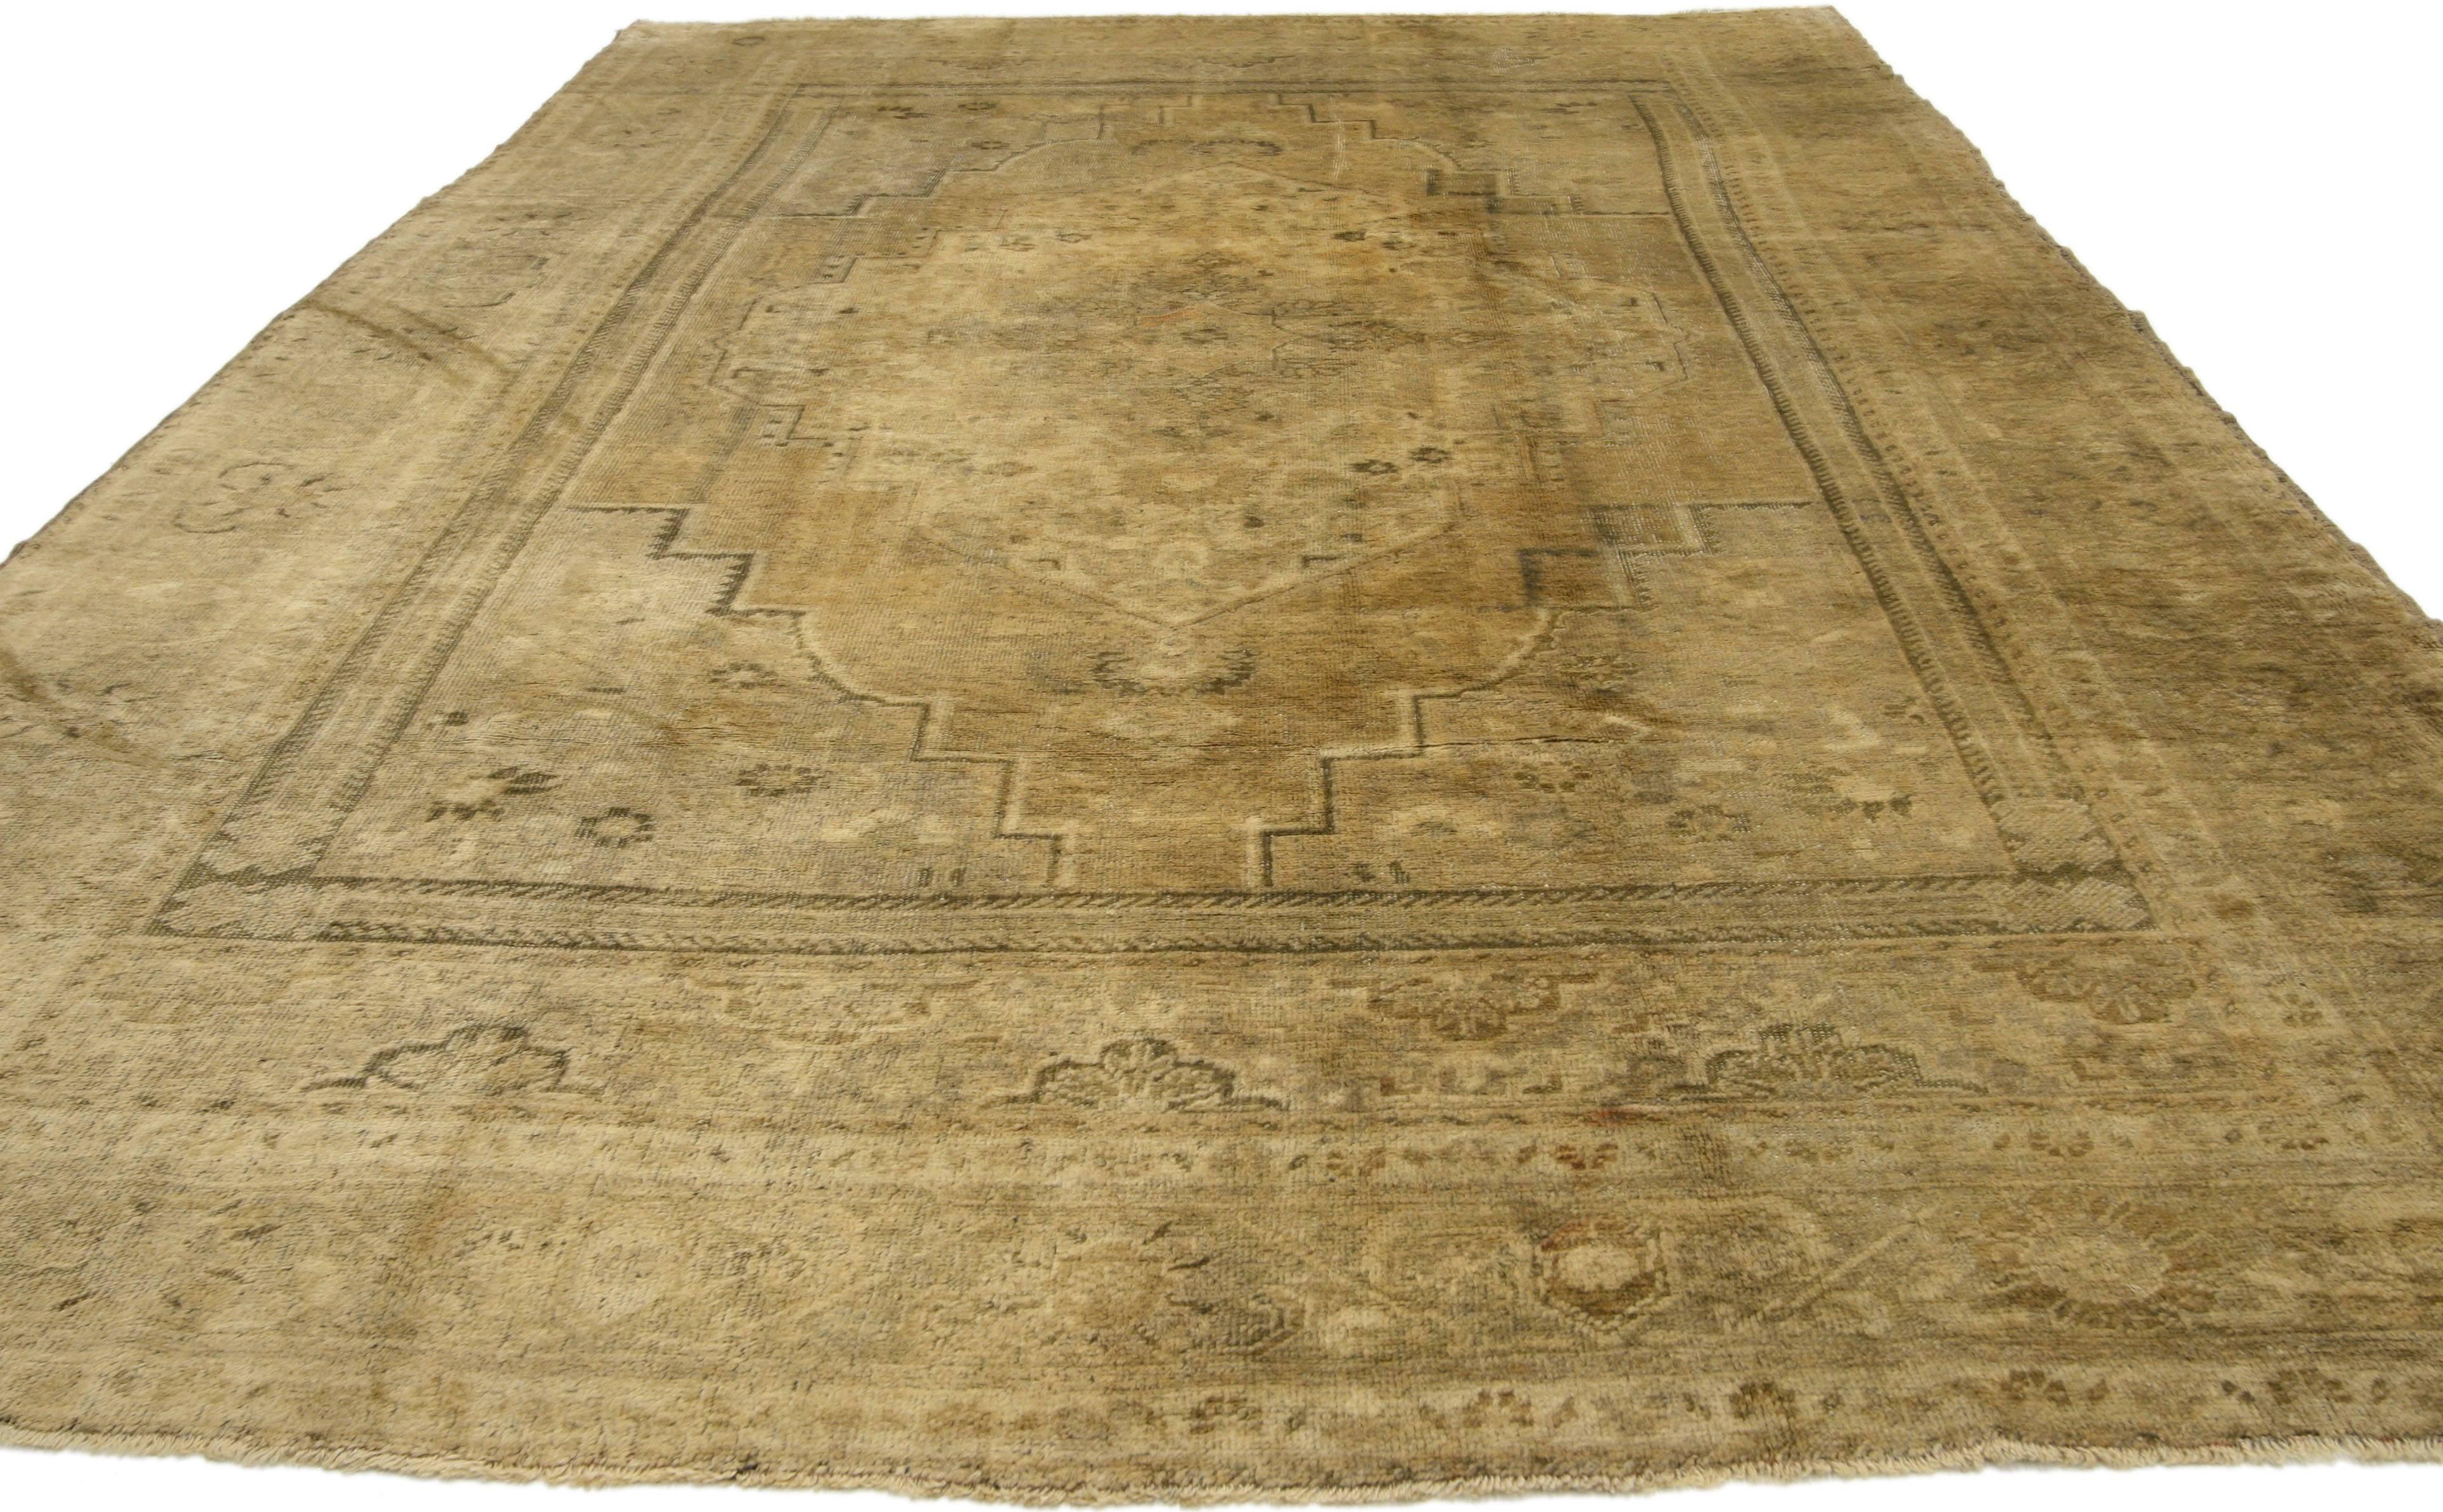 74093, vintage Turkish Oushak rug with traditional style. This hand-knotted wool vintage Turkish Oushak rug features a cusped central medallion in an abrashed field. It is framed with mihrab style quarter panels and enclosed with a complementary